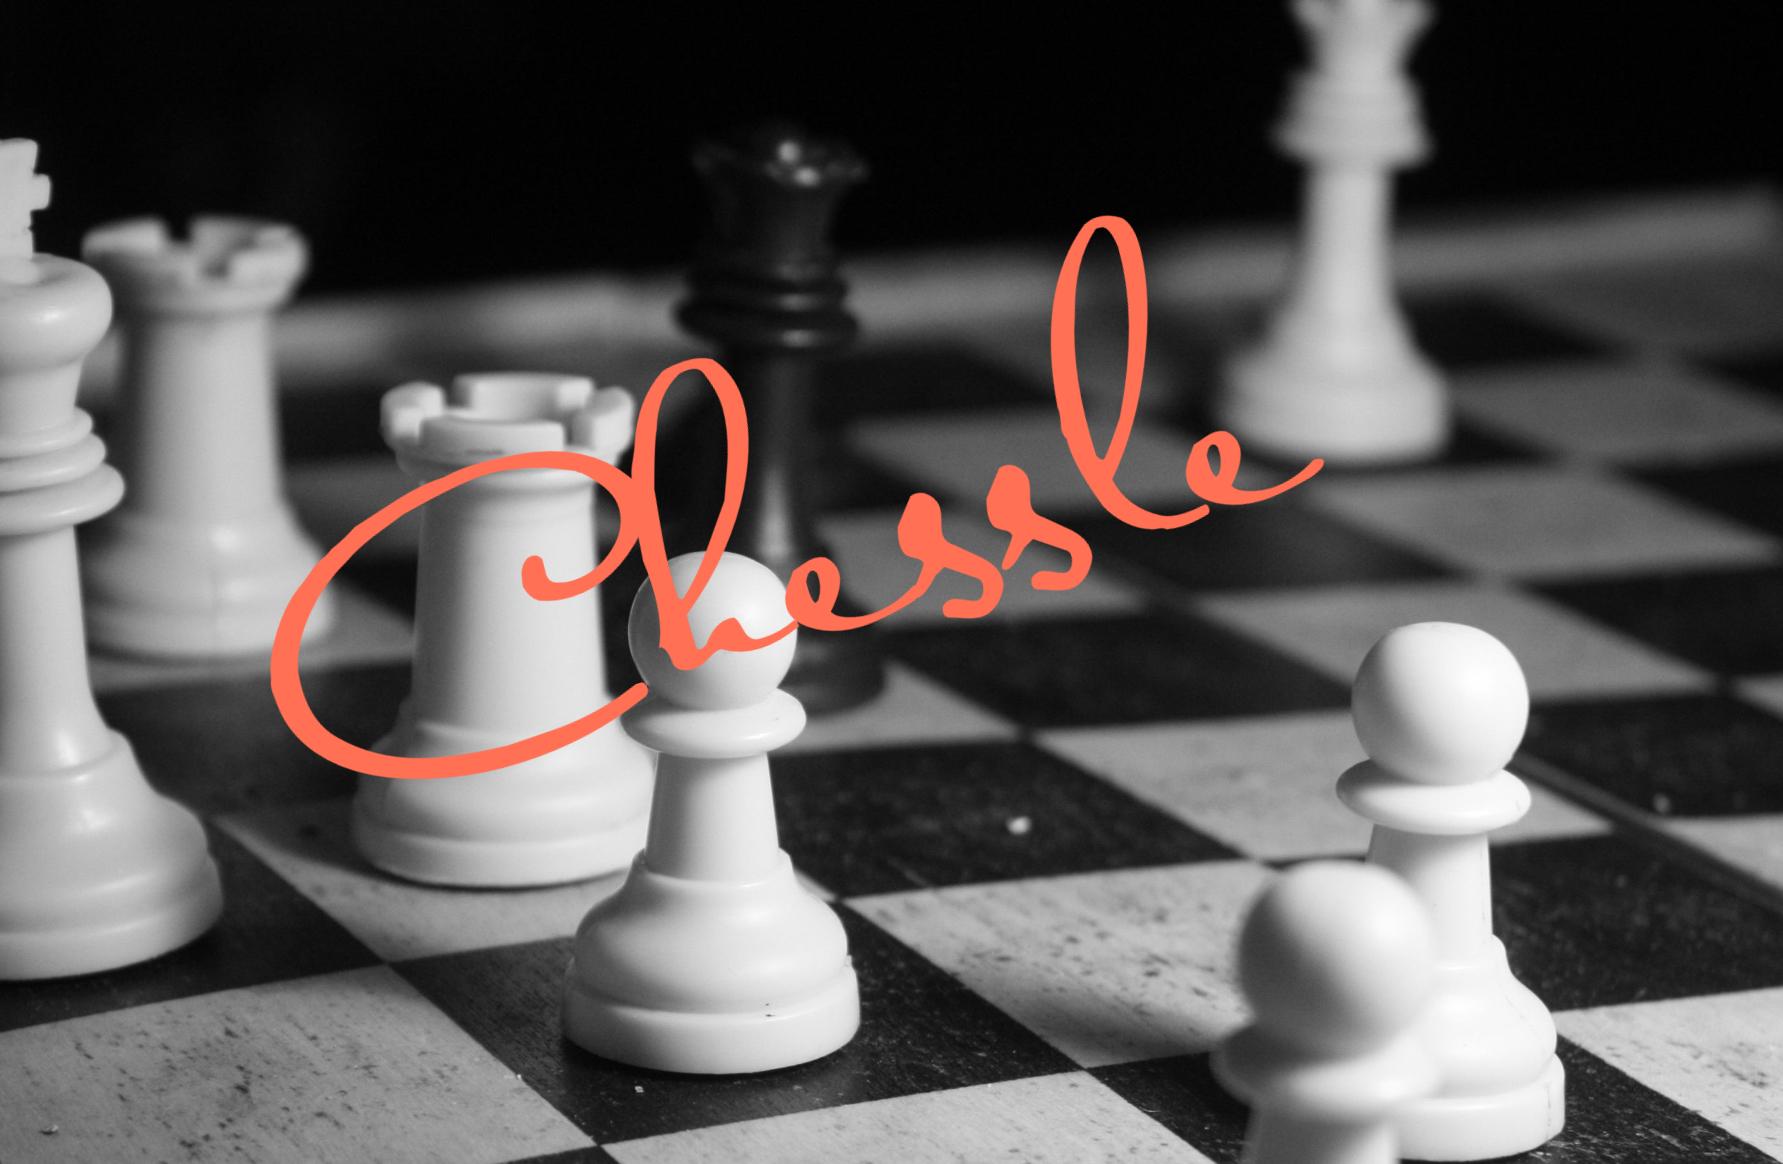 Chessle - Play Chessle On Word Games